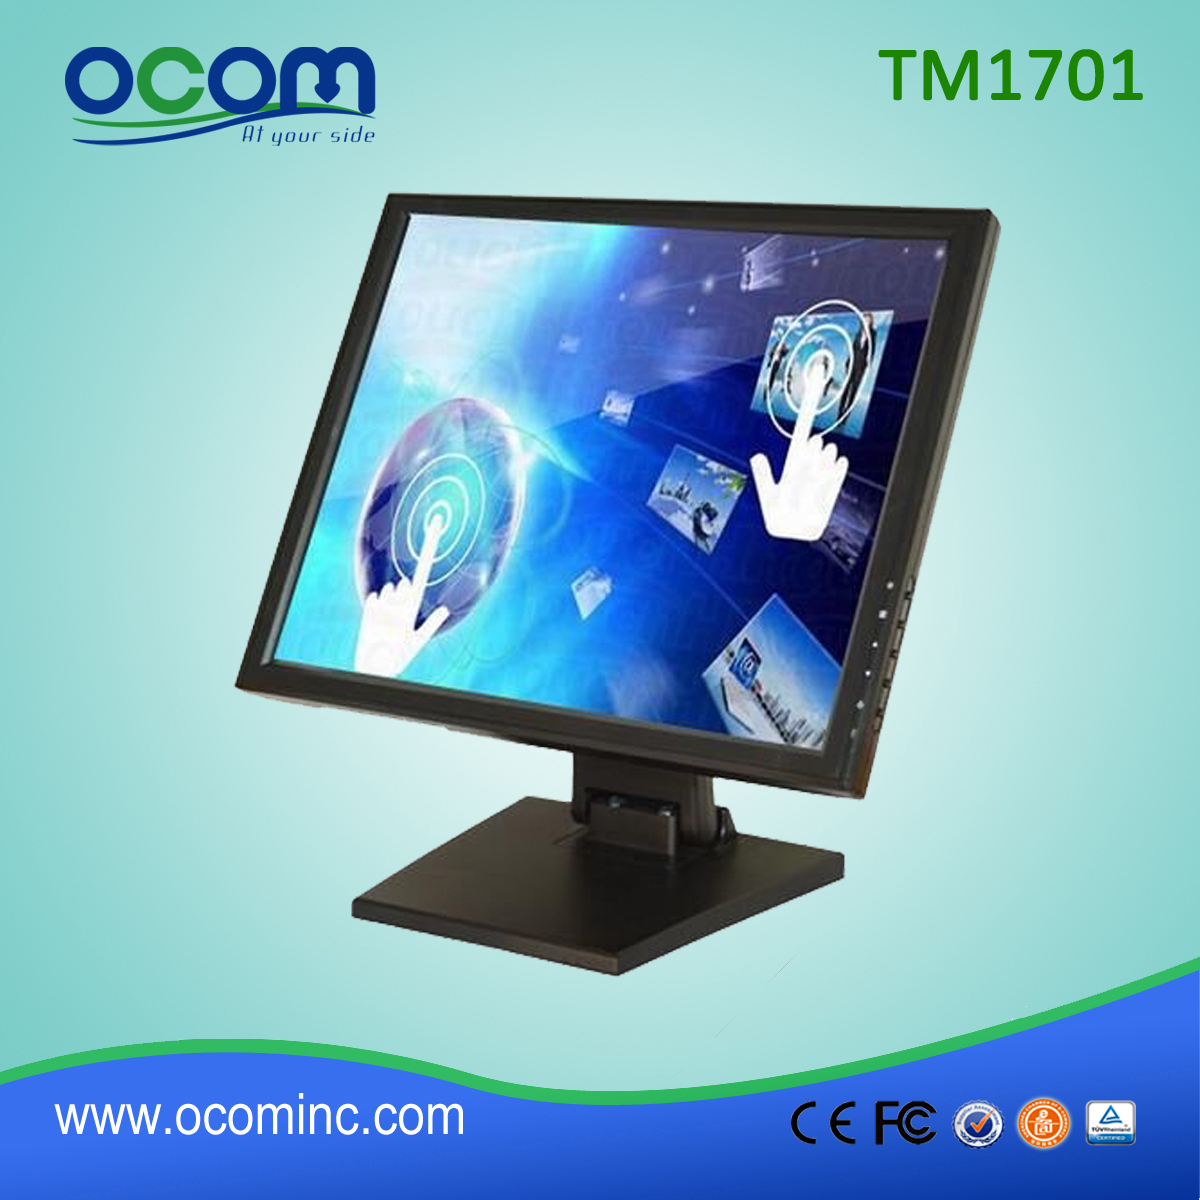 Monitor LCD 17 pollici touch screen POS TM1701